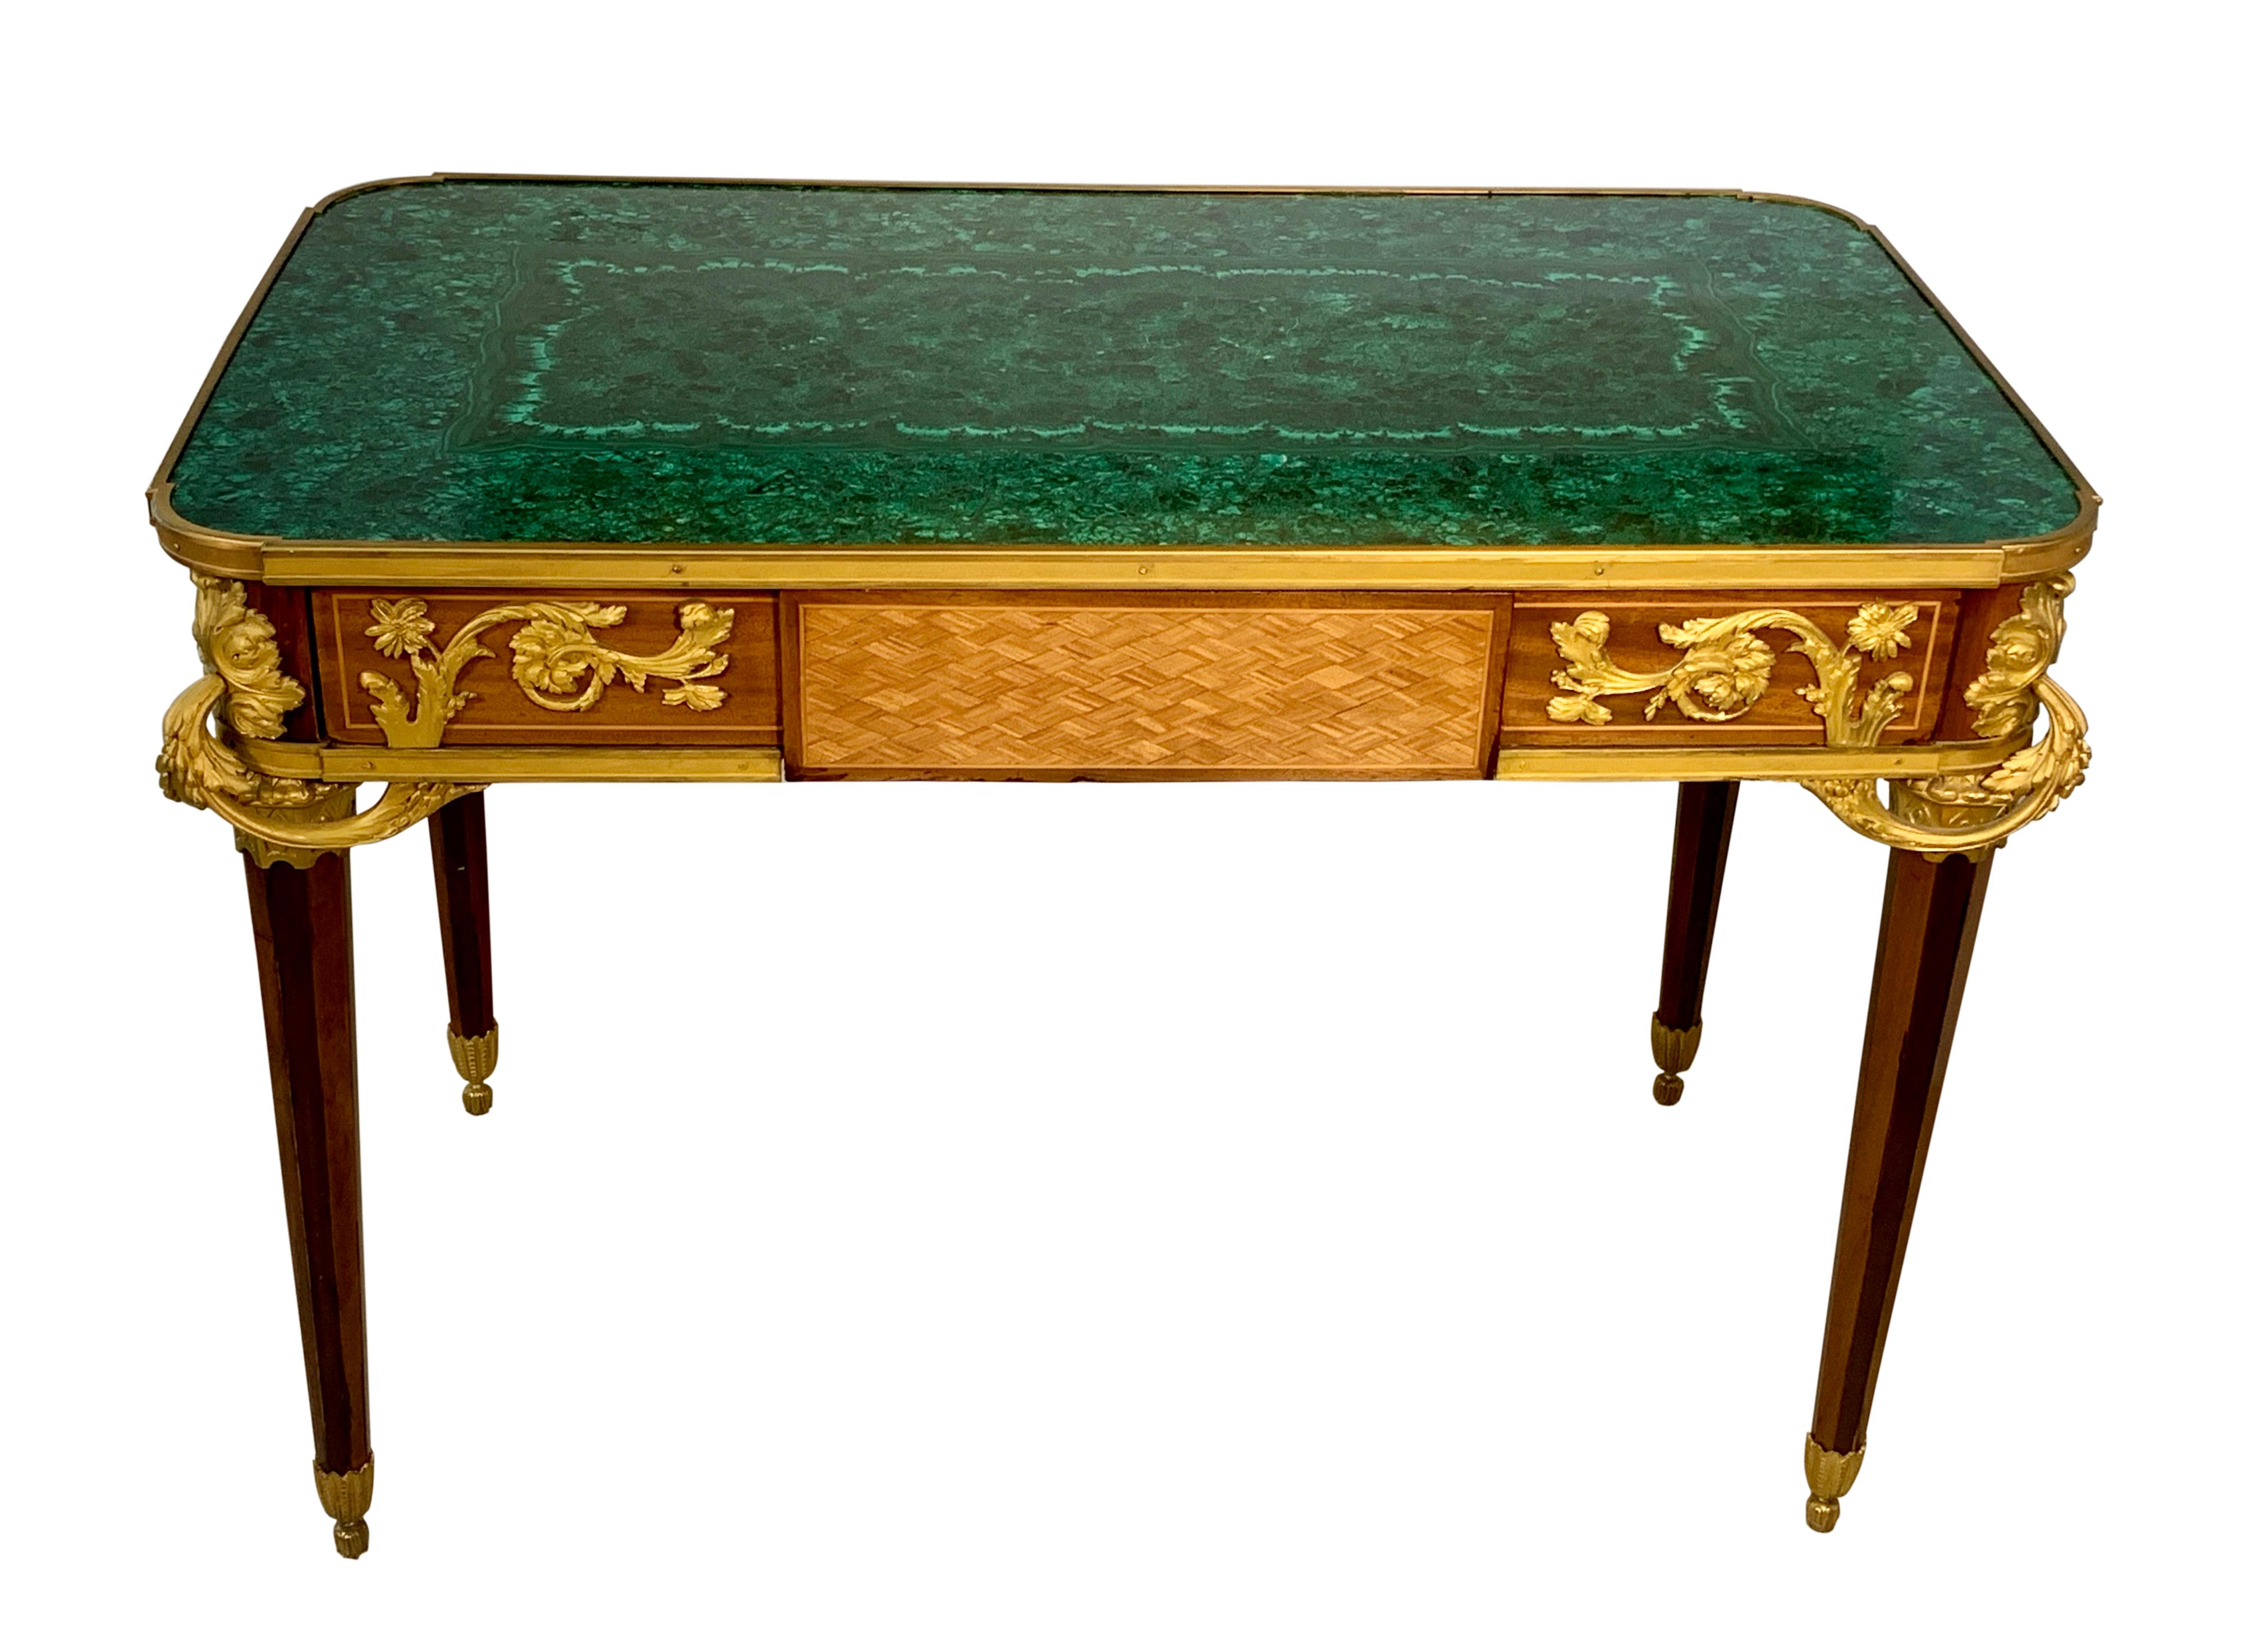 A fine Louis XVI style gilt-bronze mounted mahogany kingwood and malachite table De Salon in the manner of Jean-Henri riesener. With malachite inset rounded corner top, above a frieze drawer, the angles with outscrolled acanthus chutes on tapering